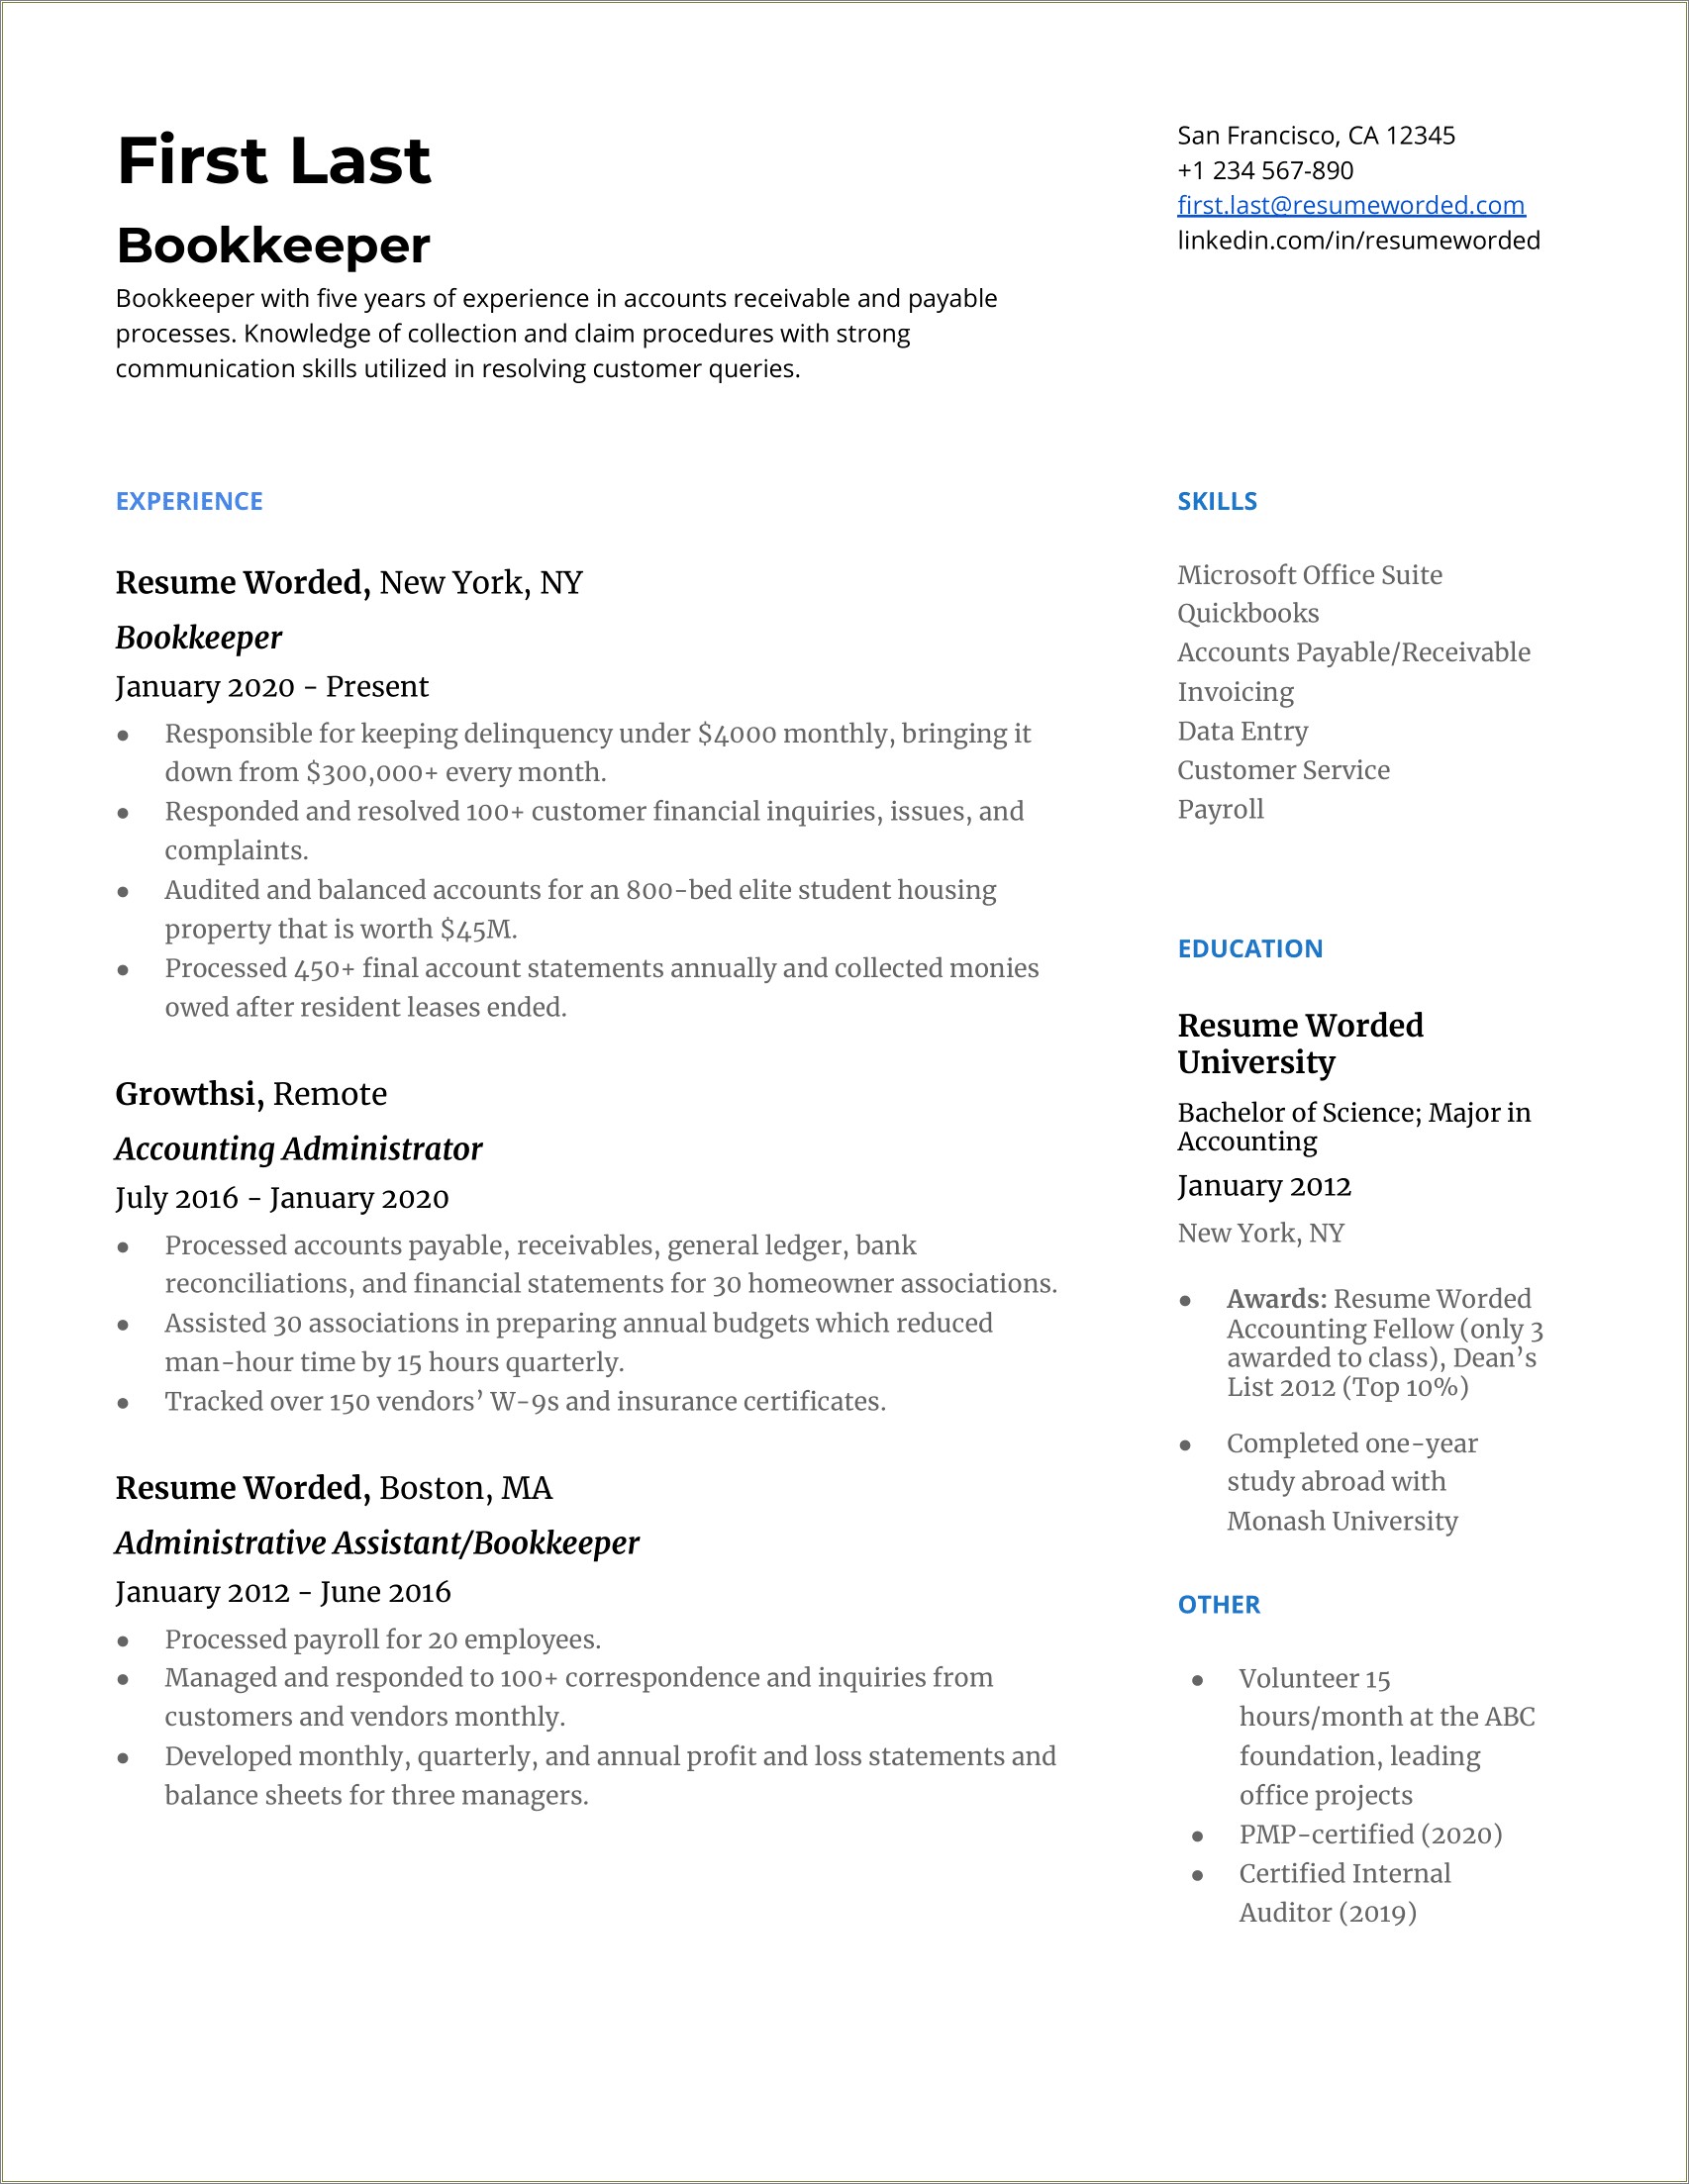 Resume Summary For Full Charge Bookkeeper